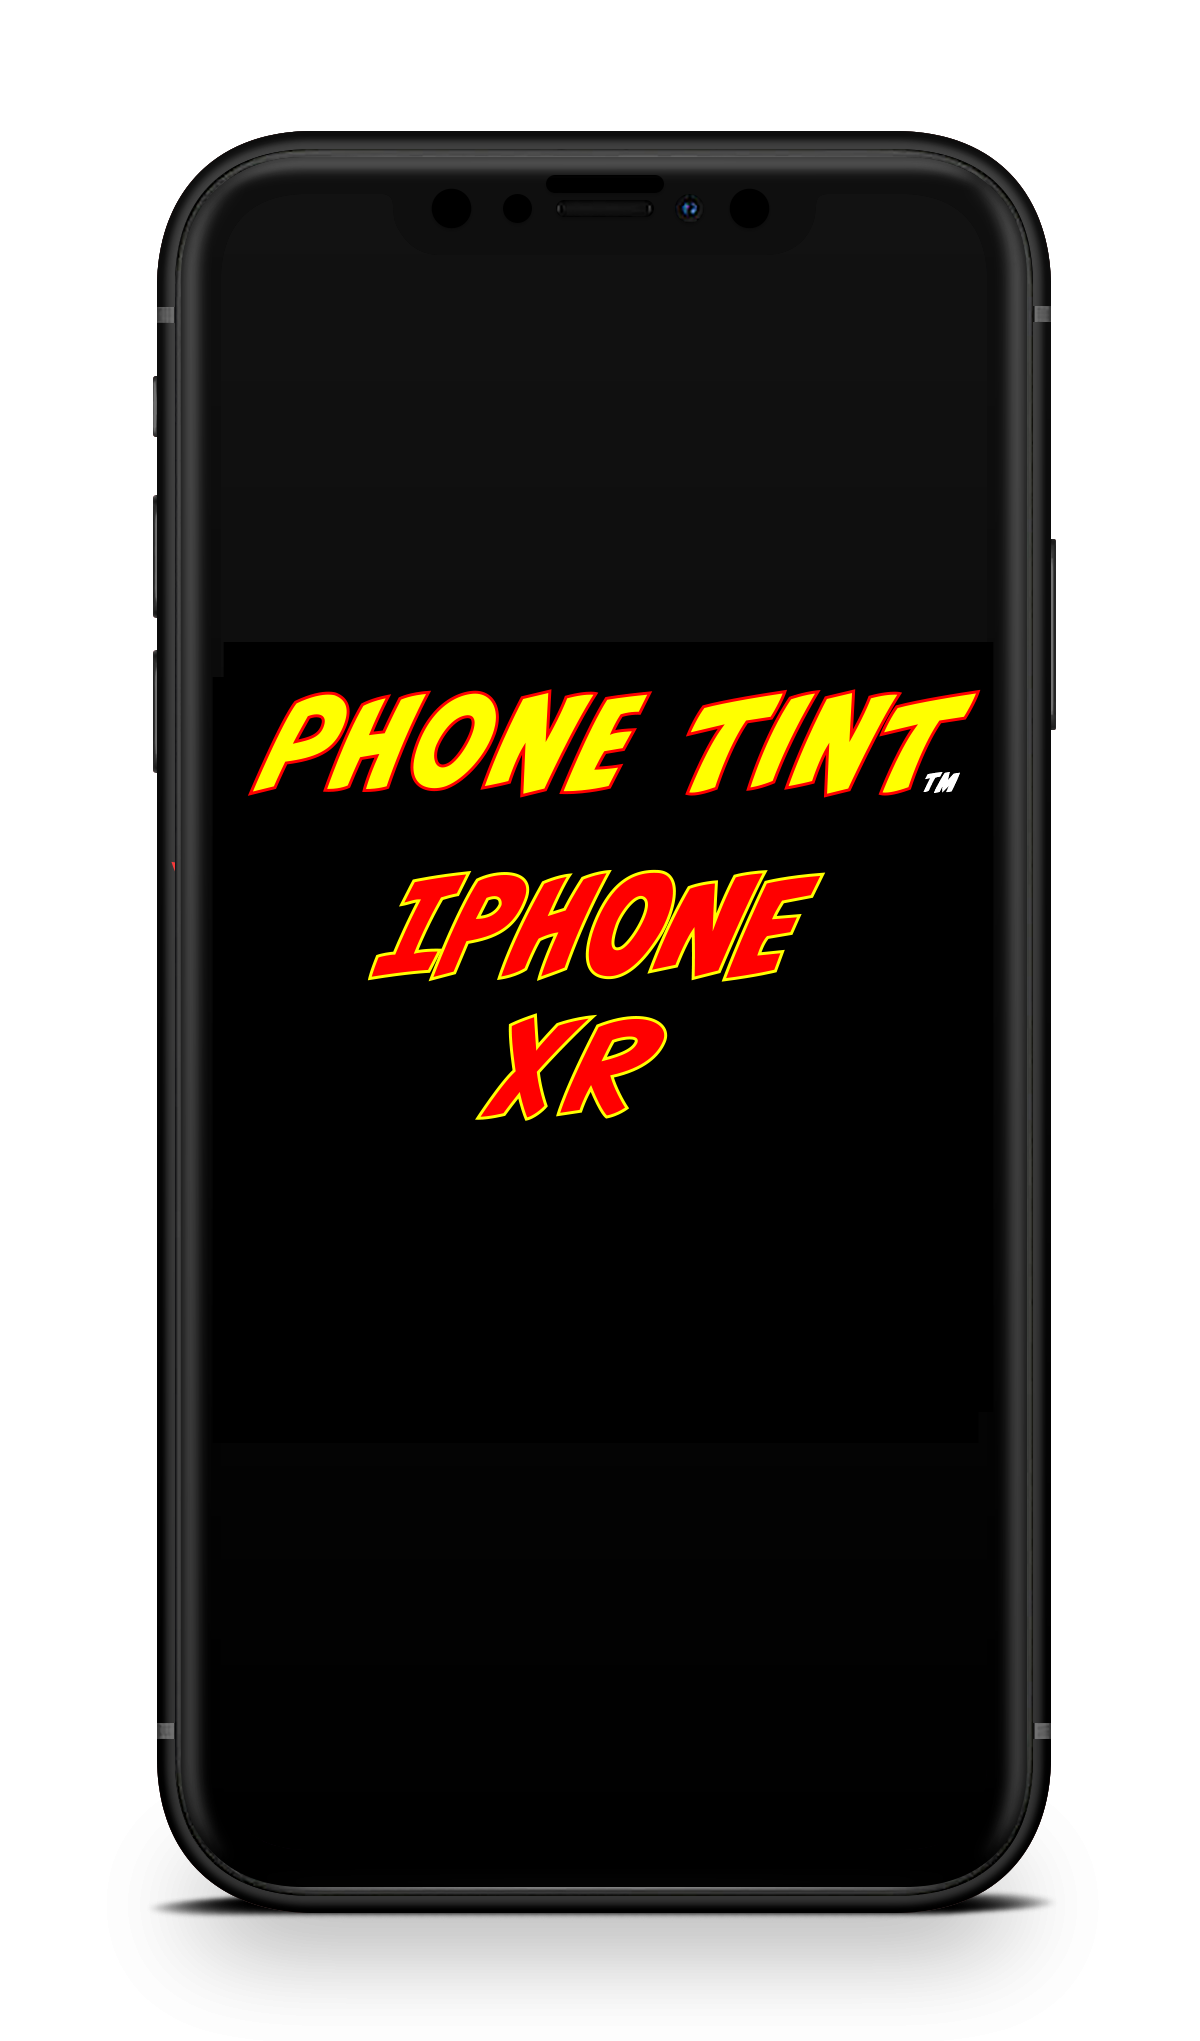 Iphone xr phone tint privacy edge to edge tempered glass screen protector. SKINZ Edmonton